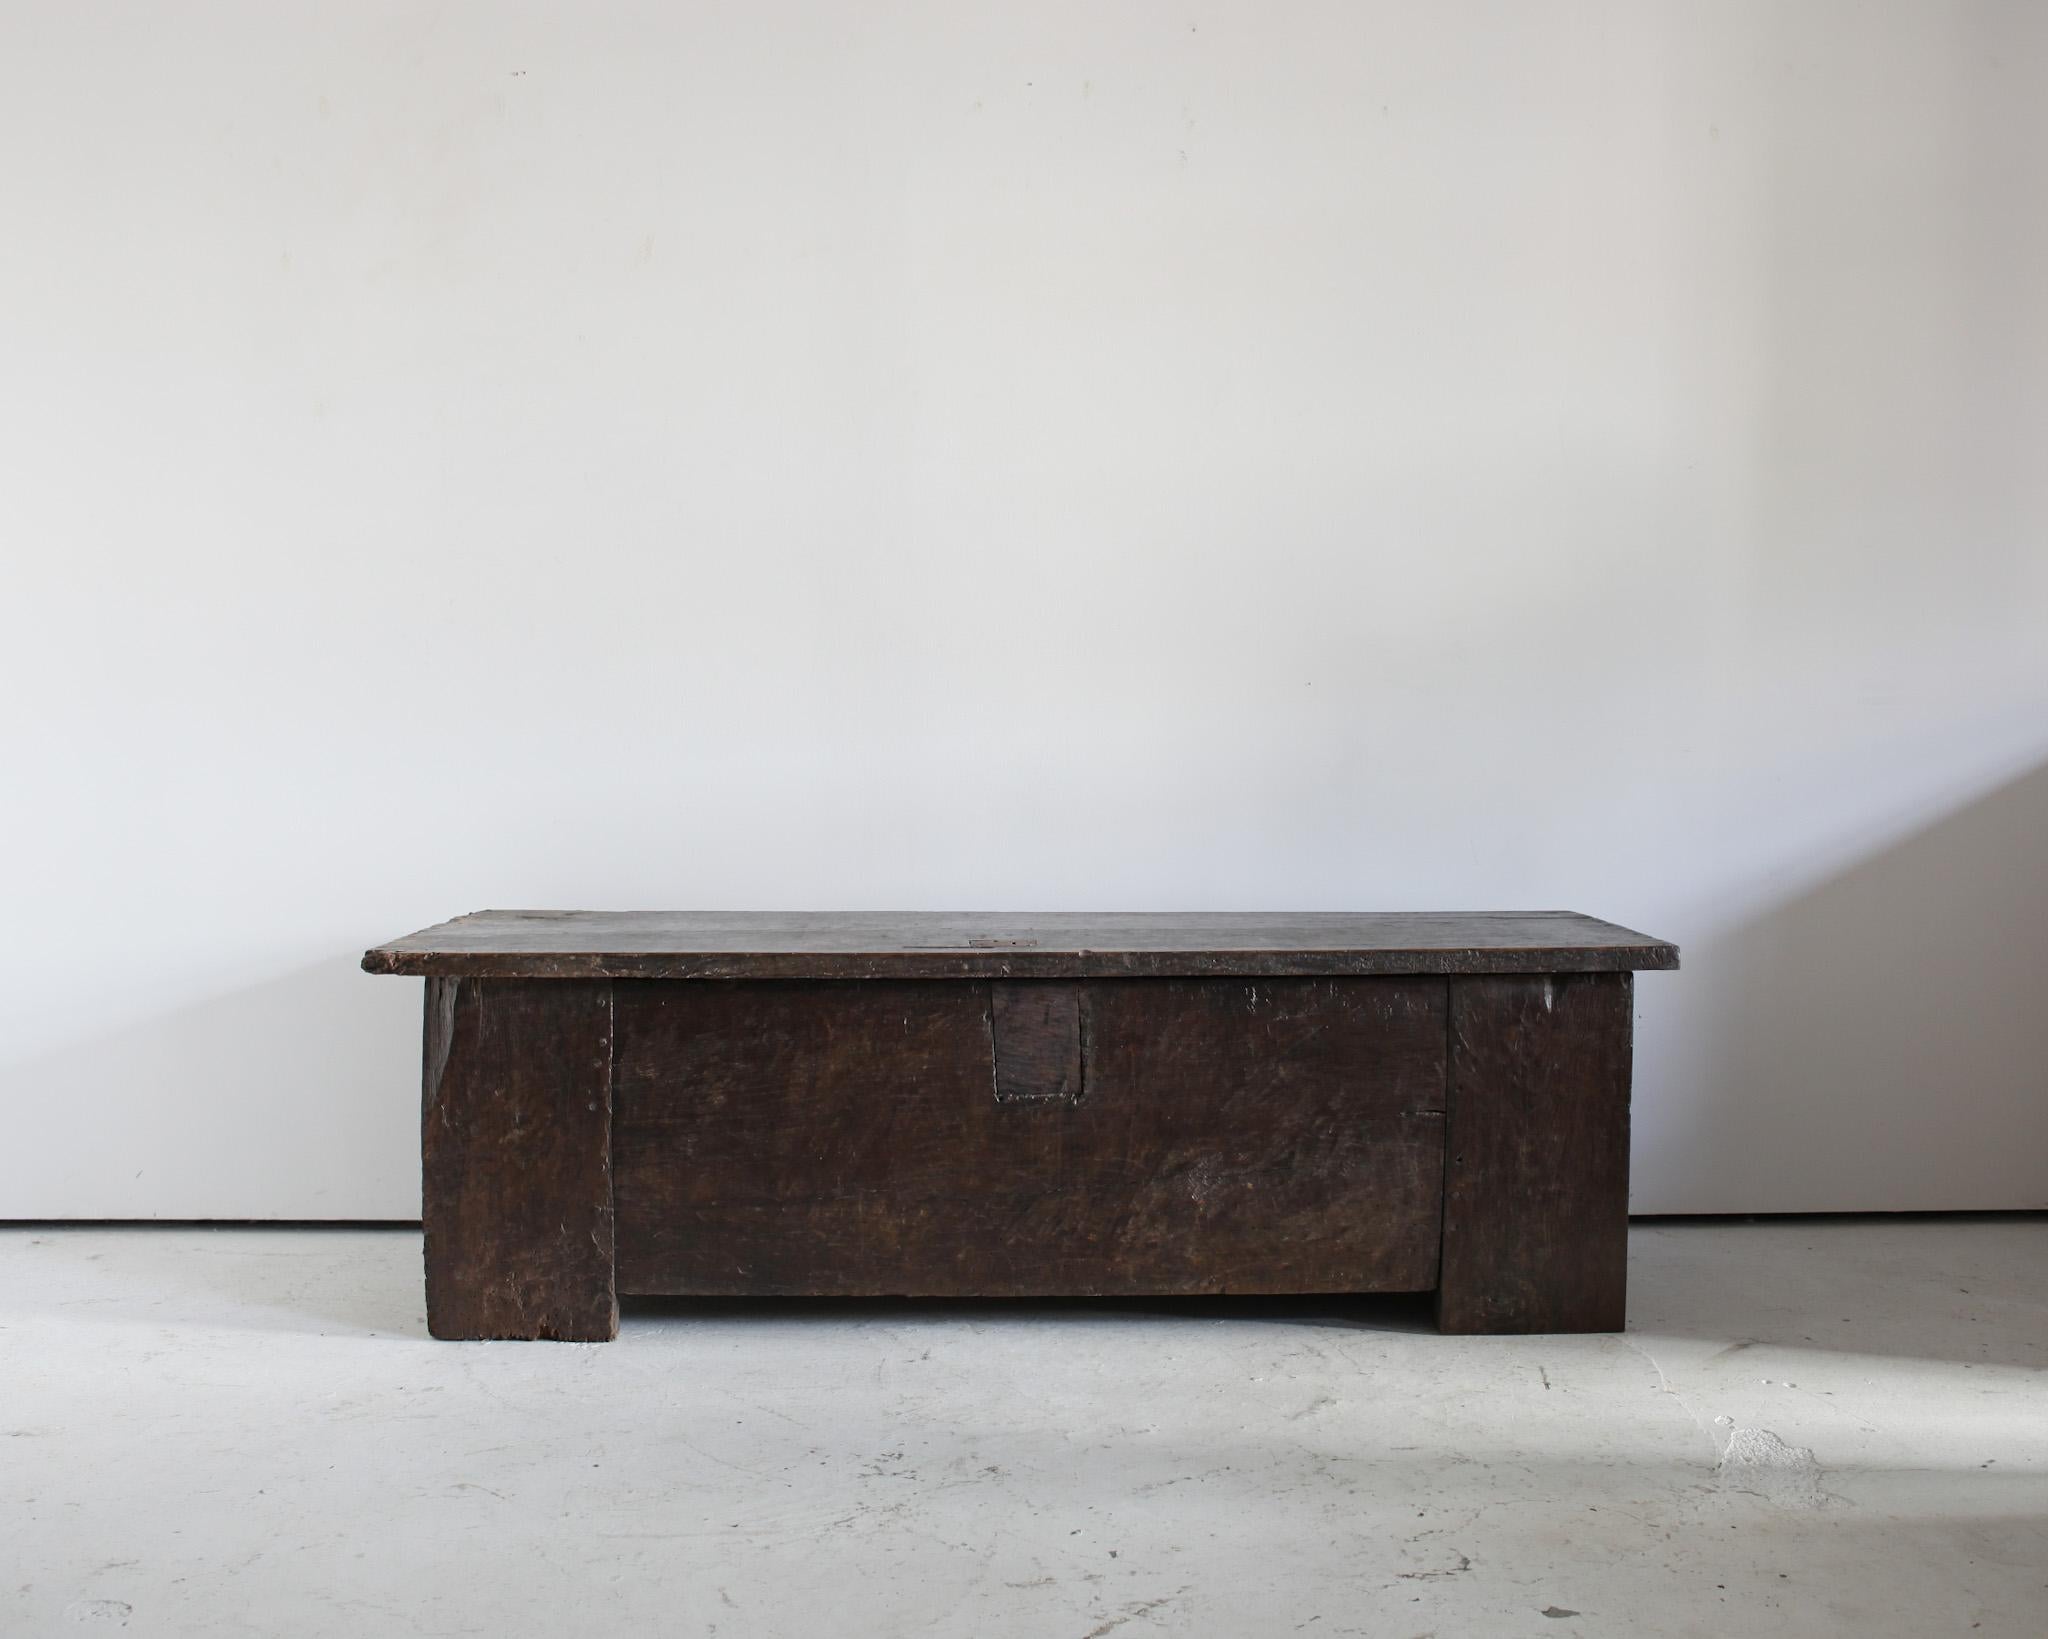 An XL 17th C. Spanish Coffer constructed from thick slabs of chestnut with substantial walnut top.

Heavily patinated over its 300+ year life.

Perfect as a low console.

Sympathetically restored in our London workshop.